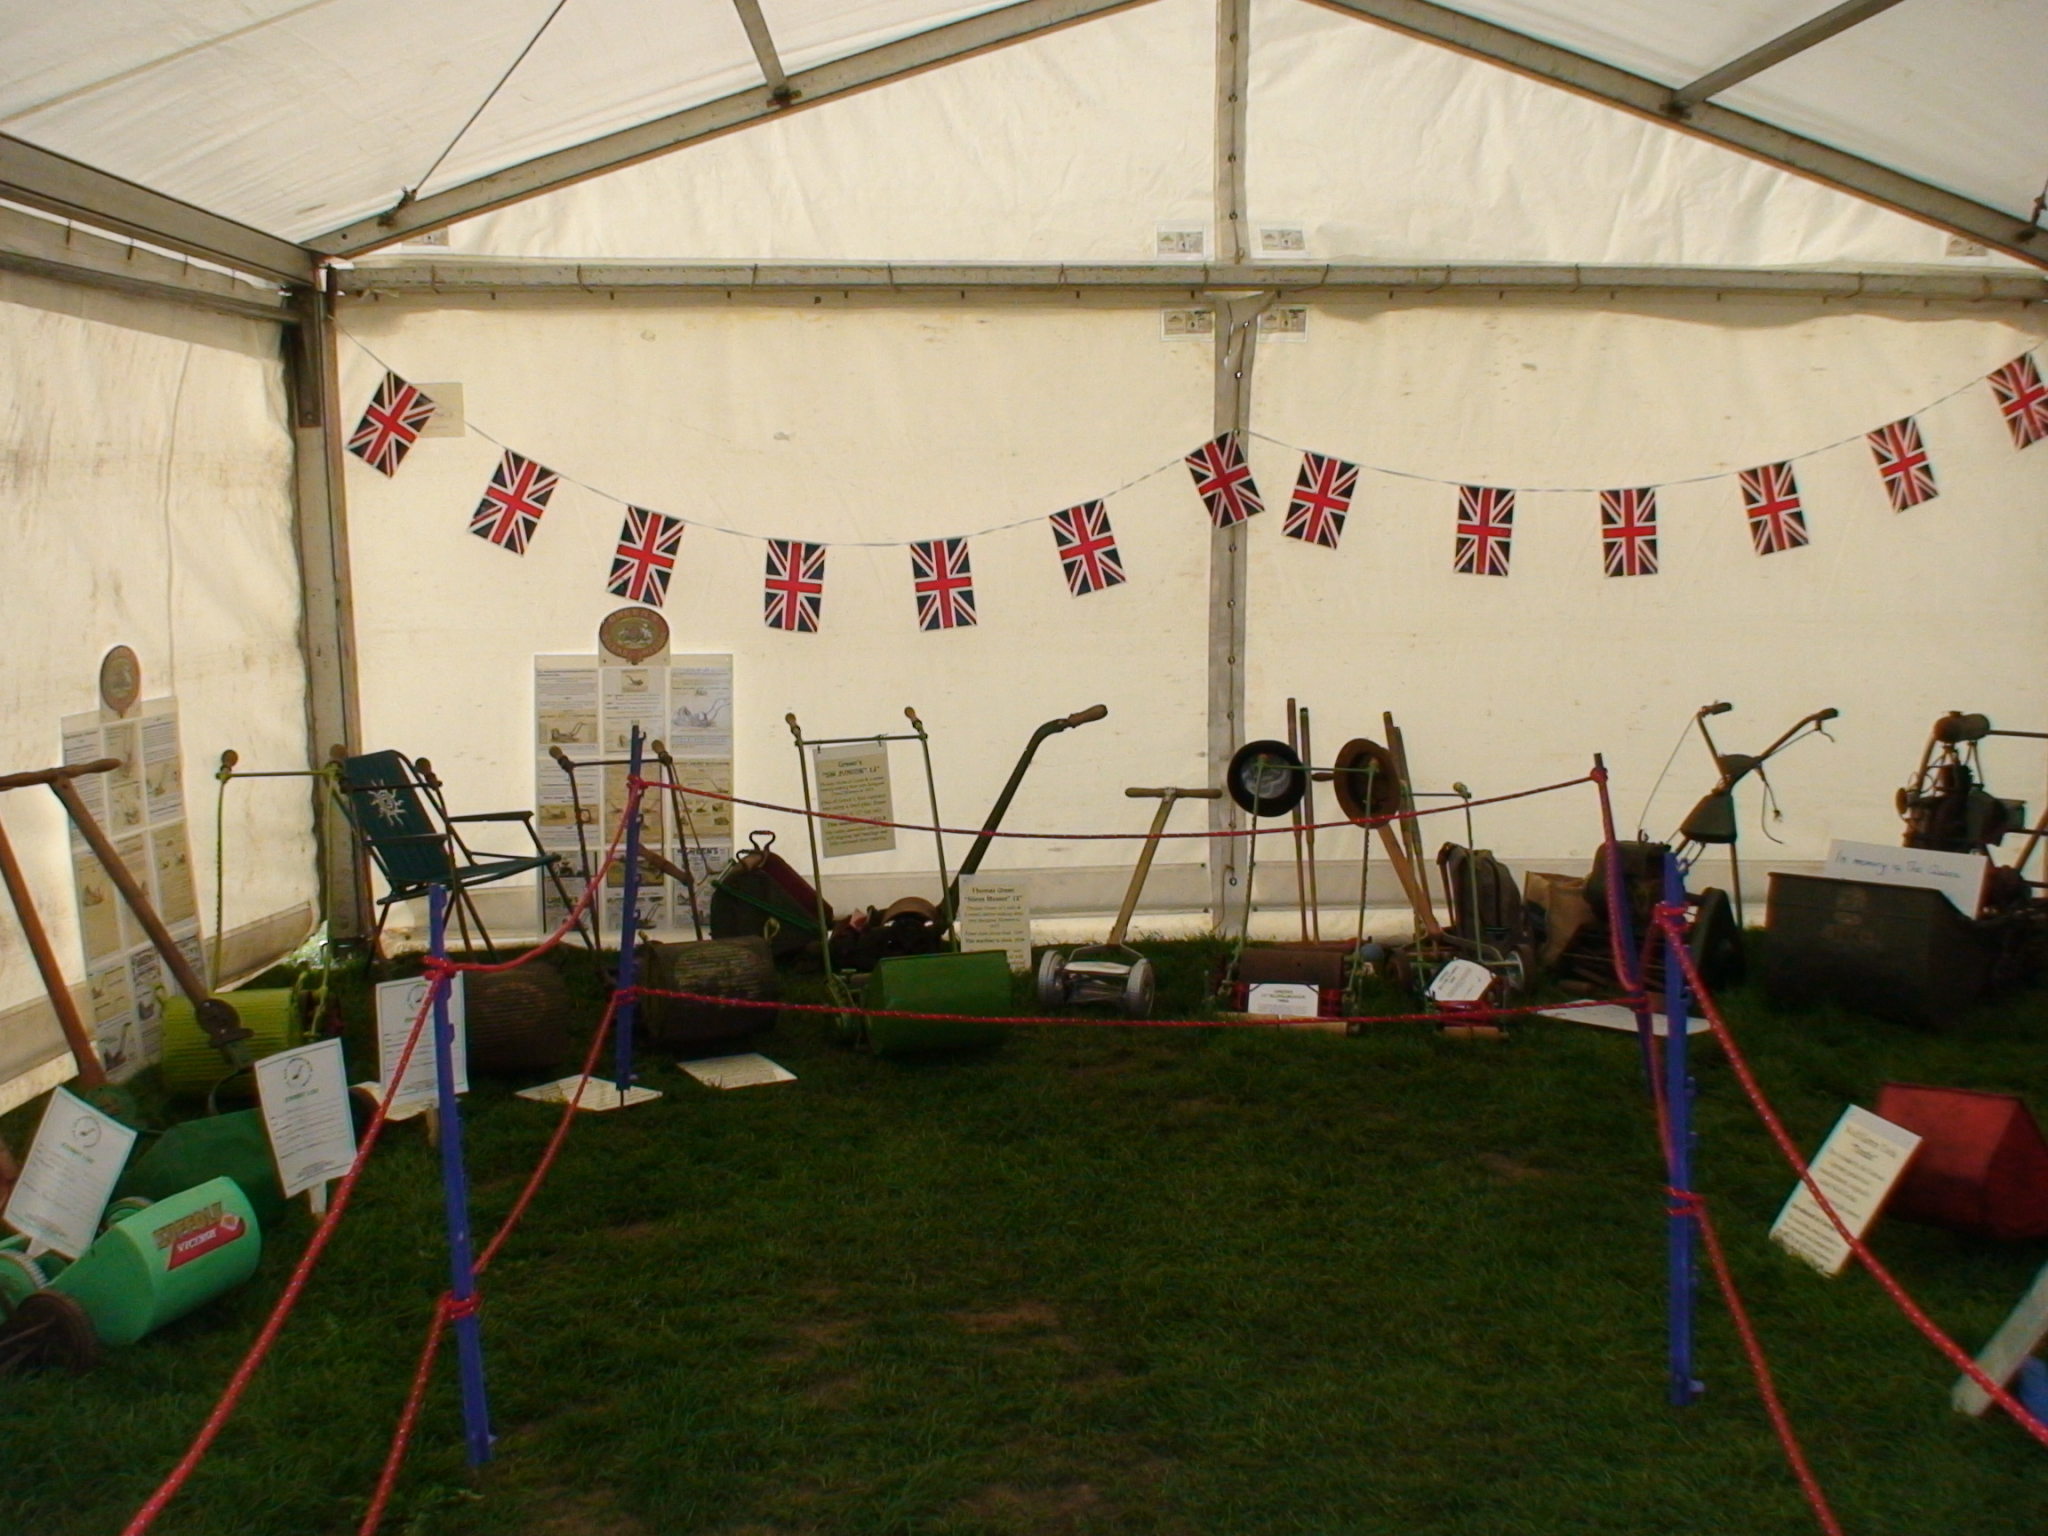 A general view on Saturday inside the Marquee